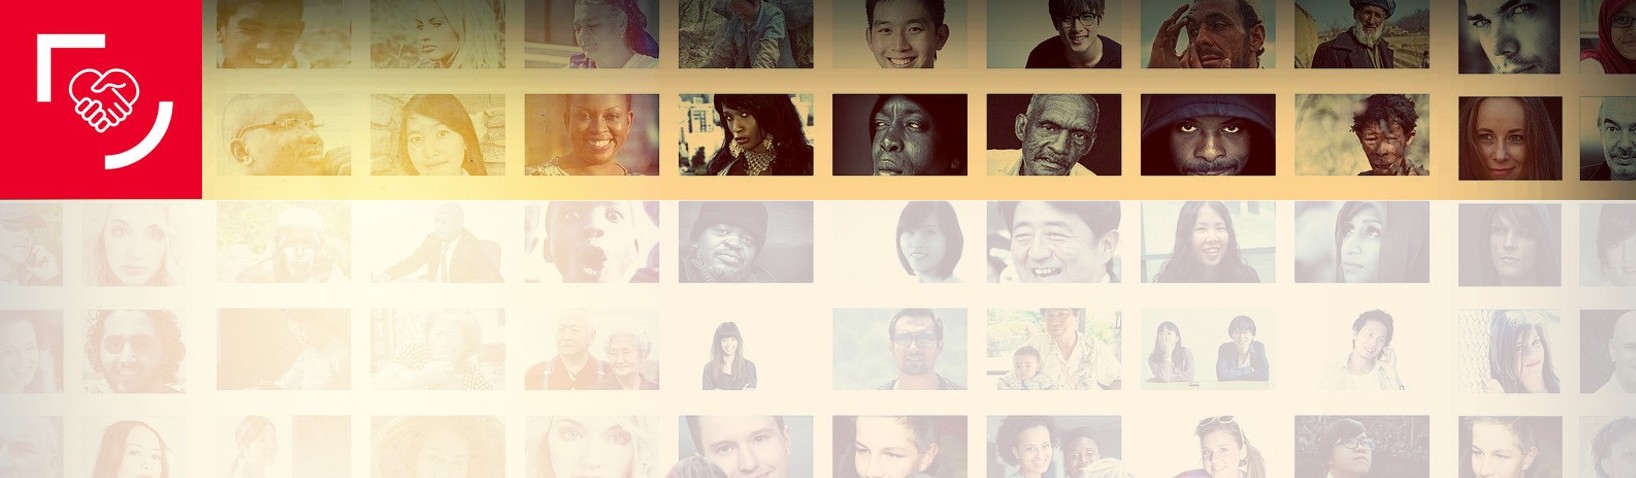 banner image of multiple people